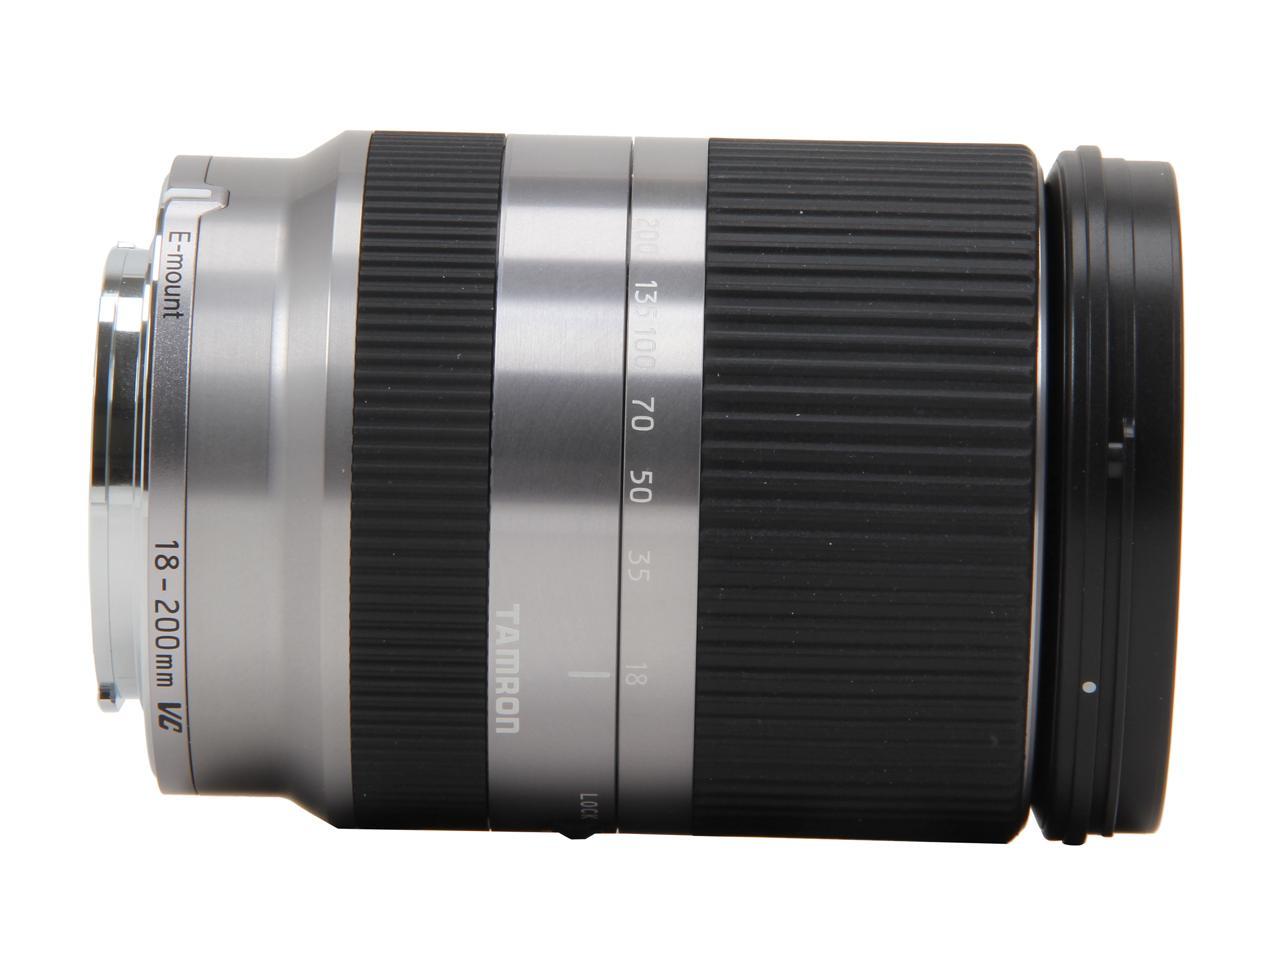 TAMRON AFB011S-700 18-200mm F/3.5-6.3 Di III VC Lens For SONY E-mount Silver